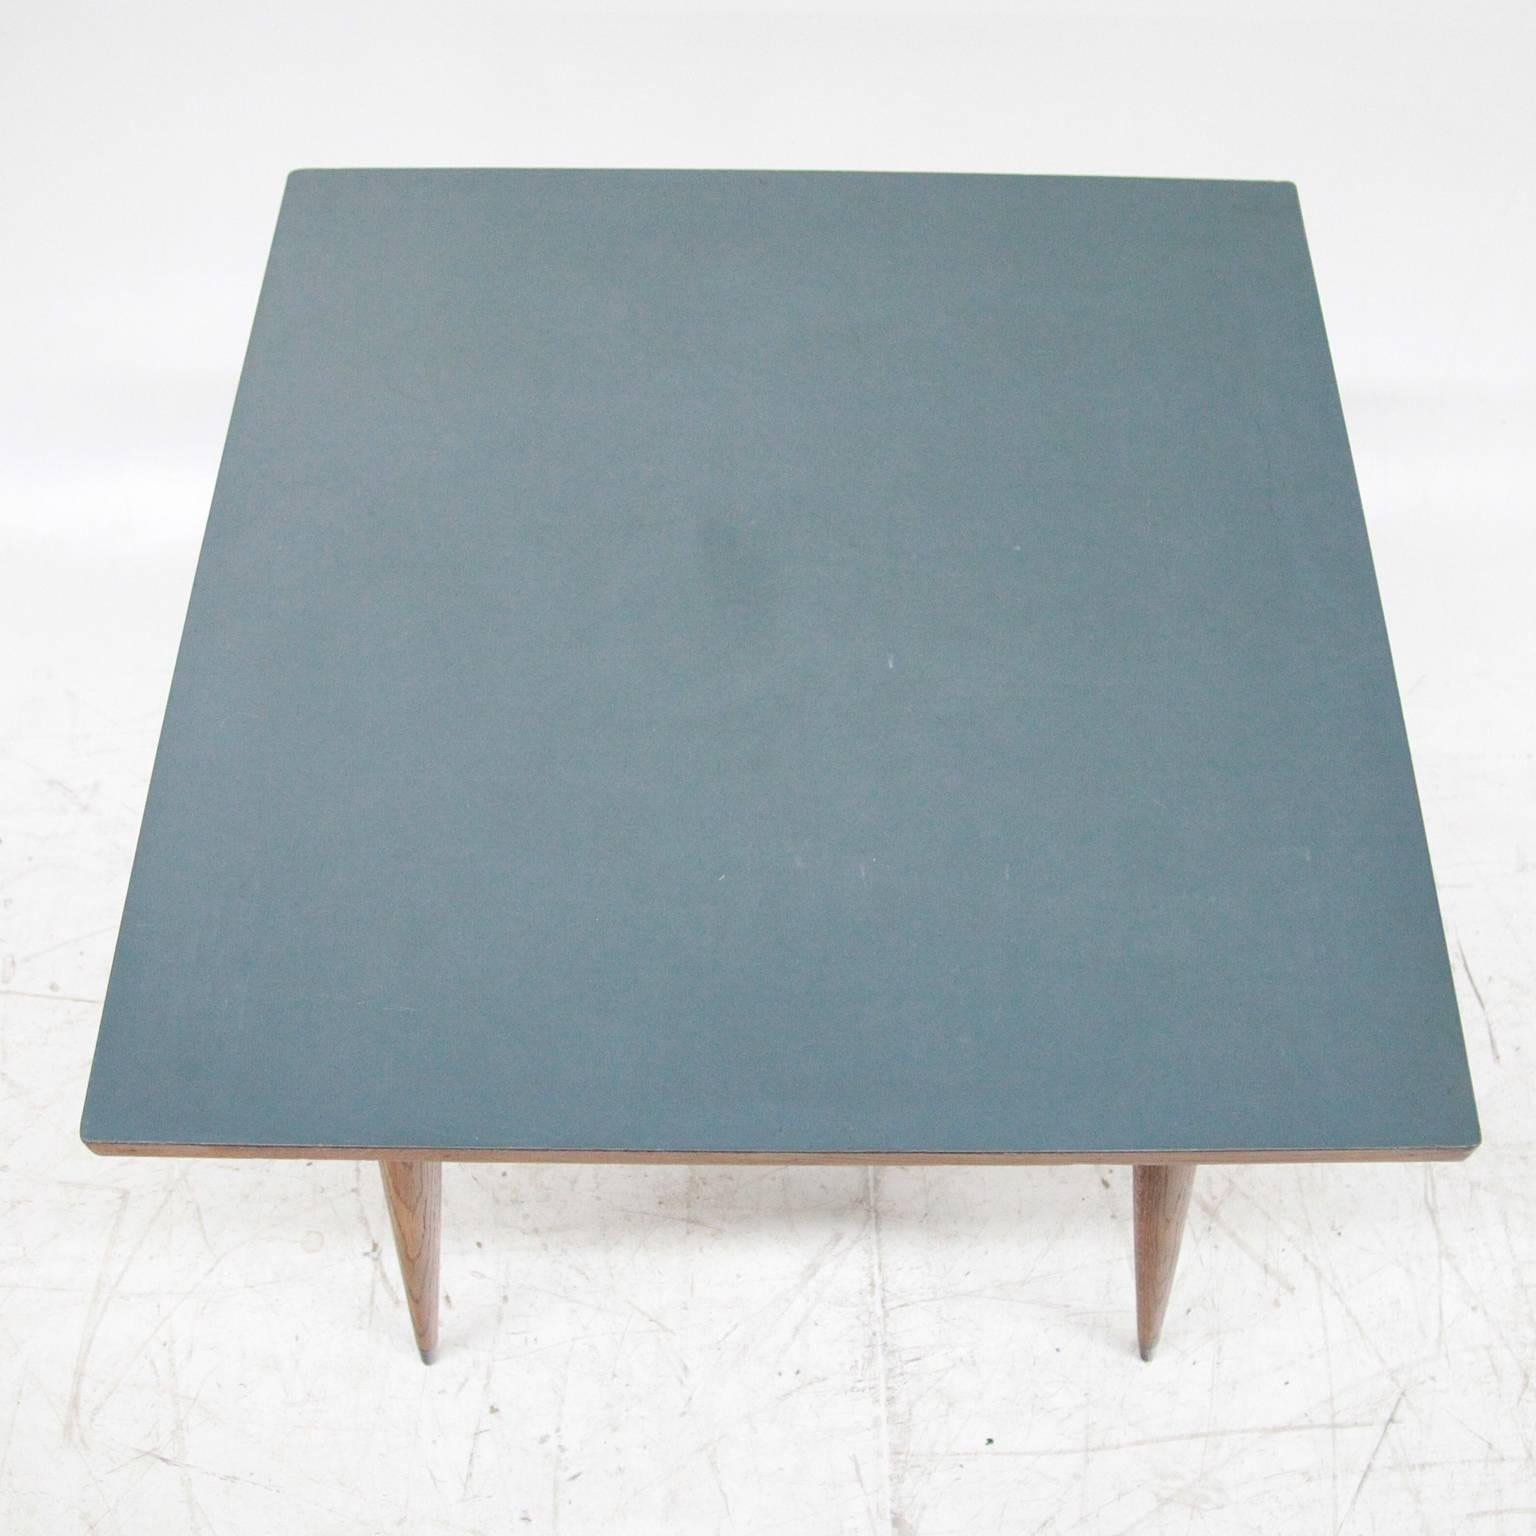 A table attributed to the Italian designer Gio Ponti with a square surface situated on four long conical legs with blackened ends.